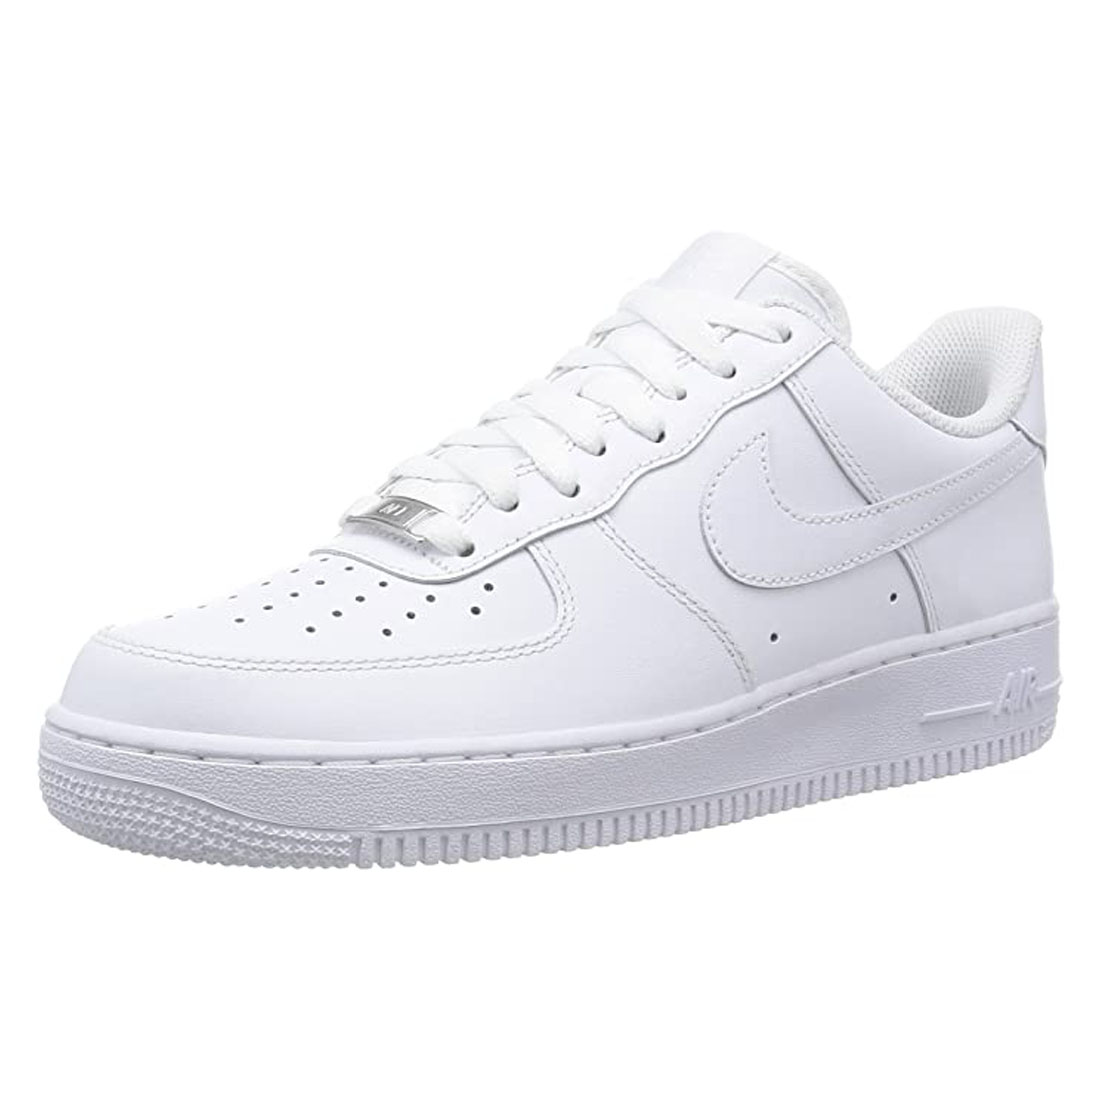 Nike Air Force 1 Low Triple White Junior Kids Trainers